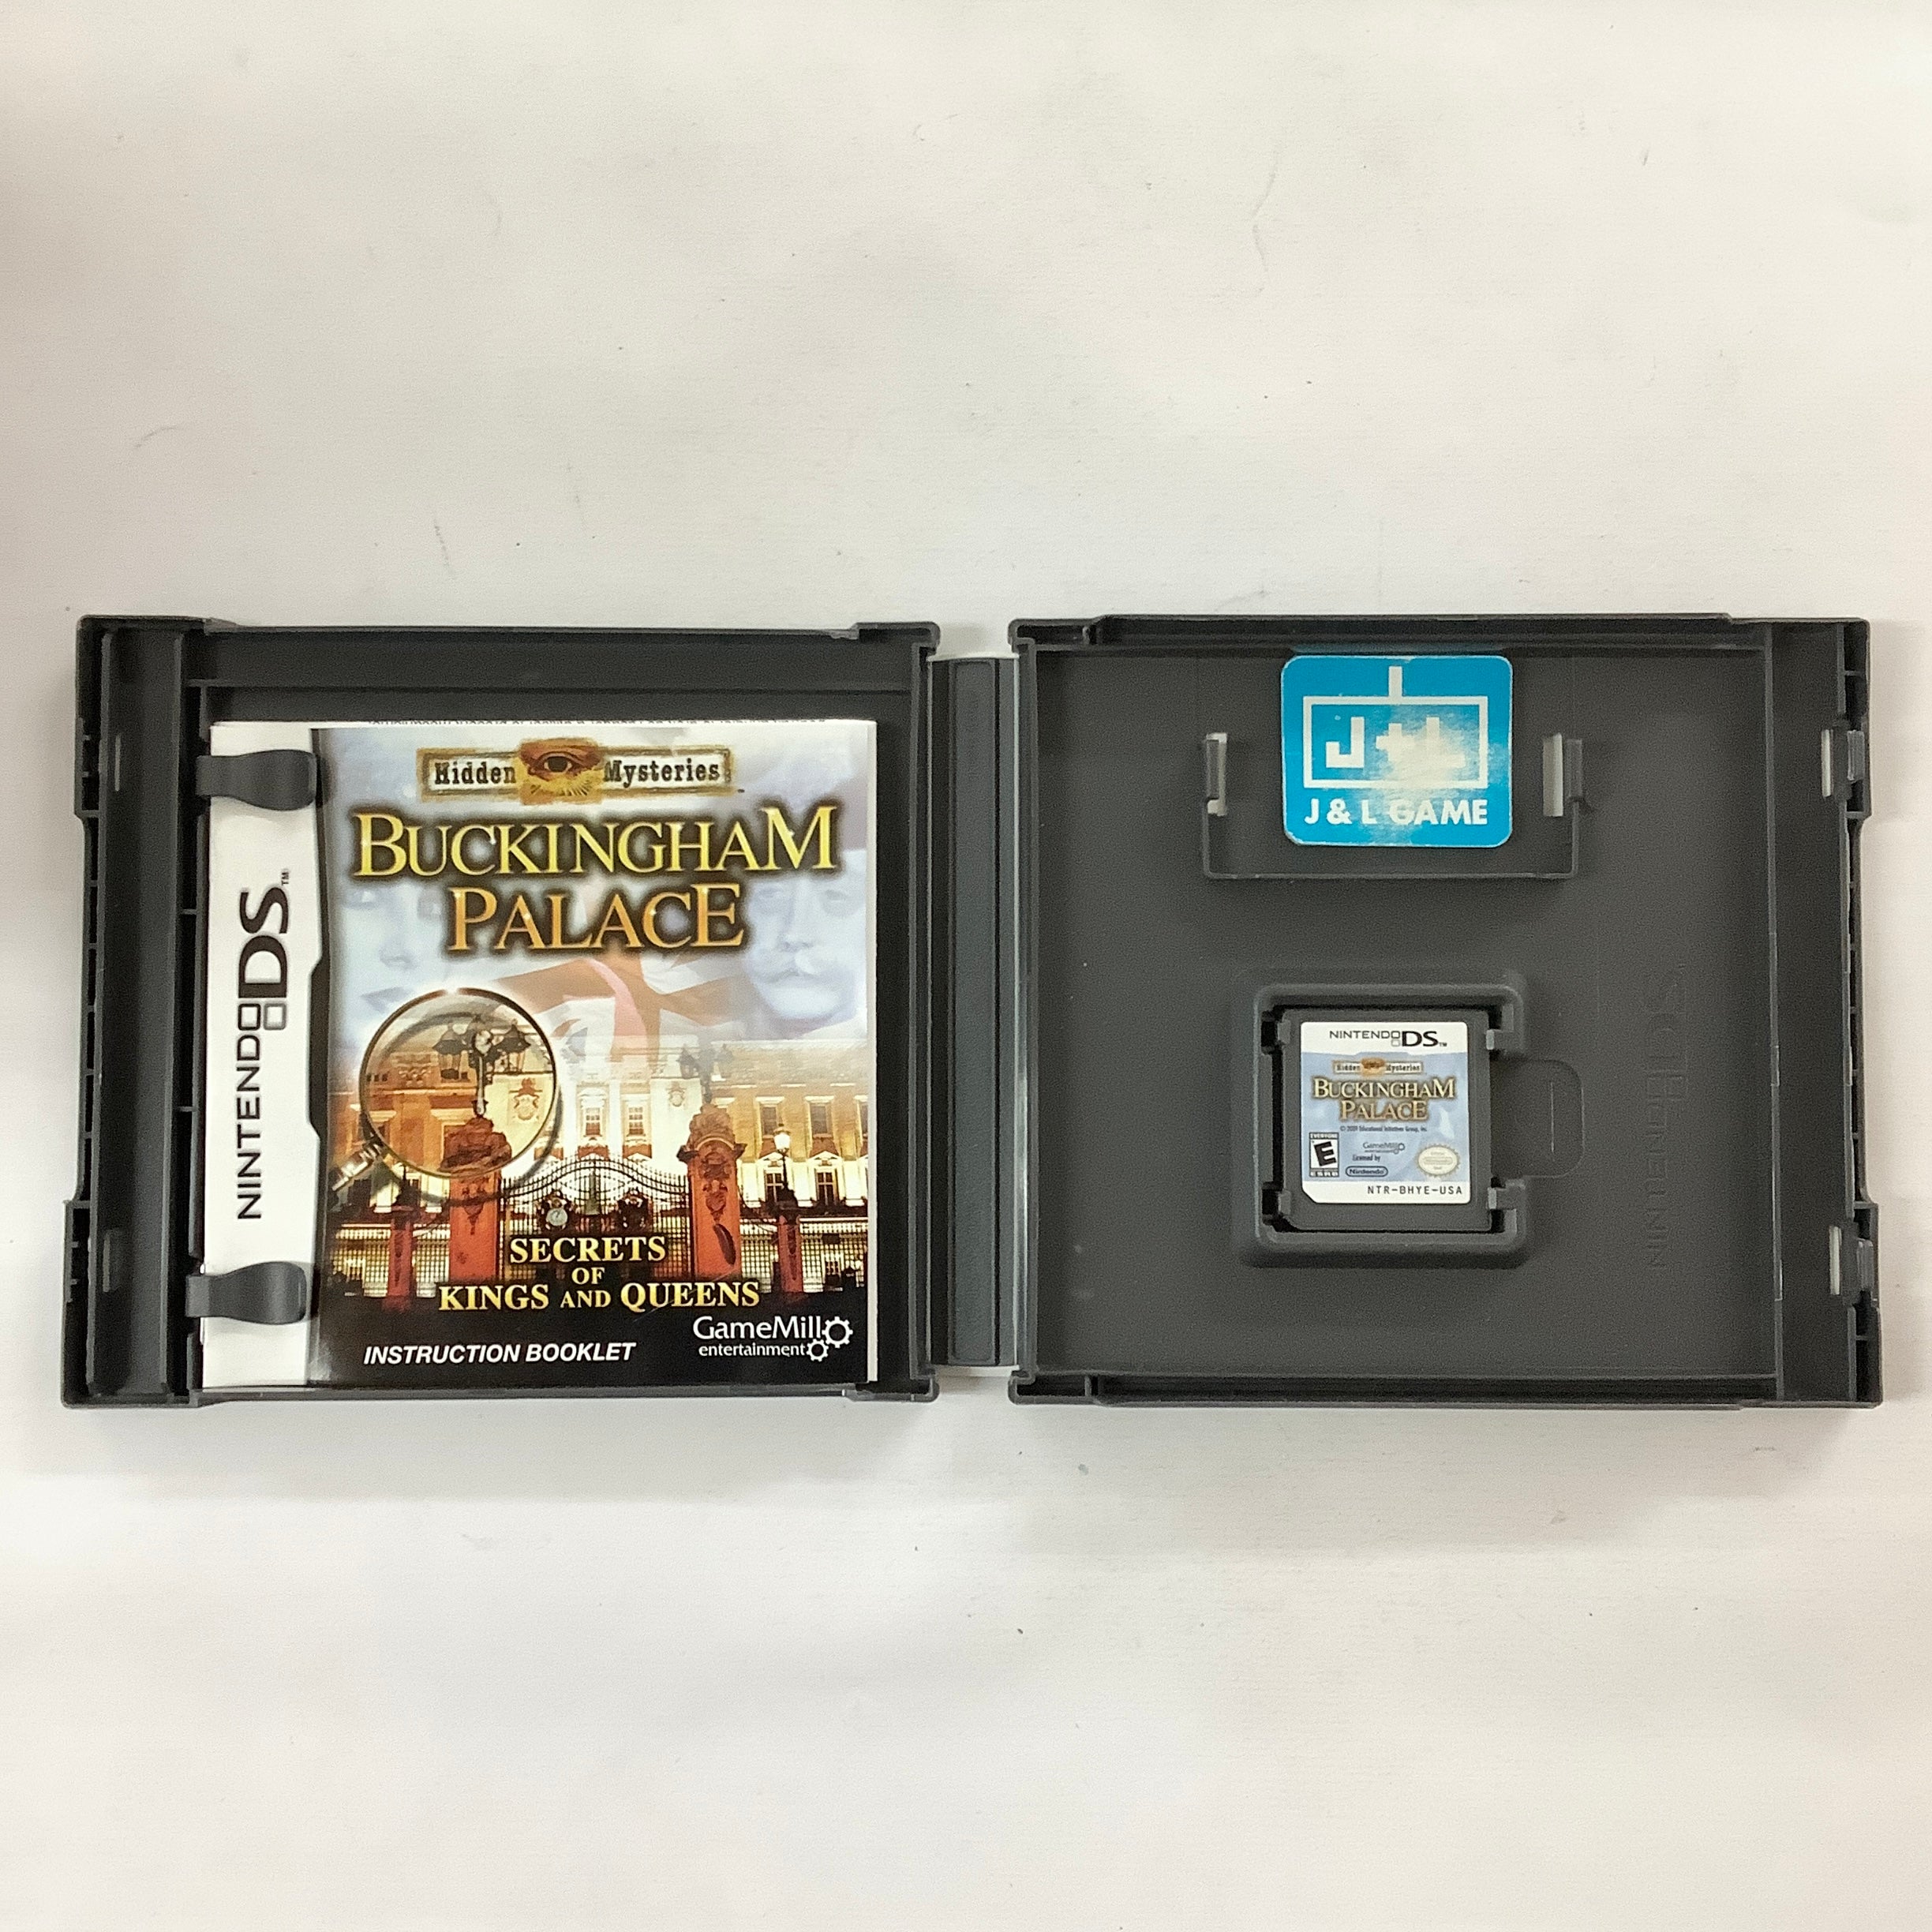 Hidden Mysteries: Buckingham Palace - (NDS) Nintendo DS [Pre-Owned] Video Games GameMill Publishing   